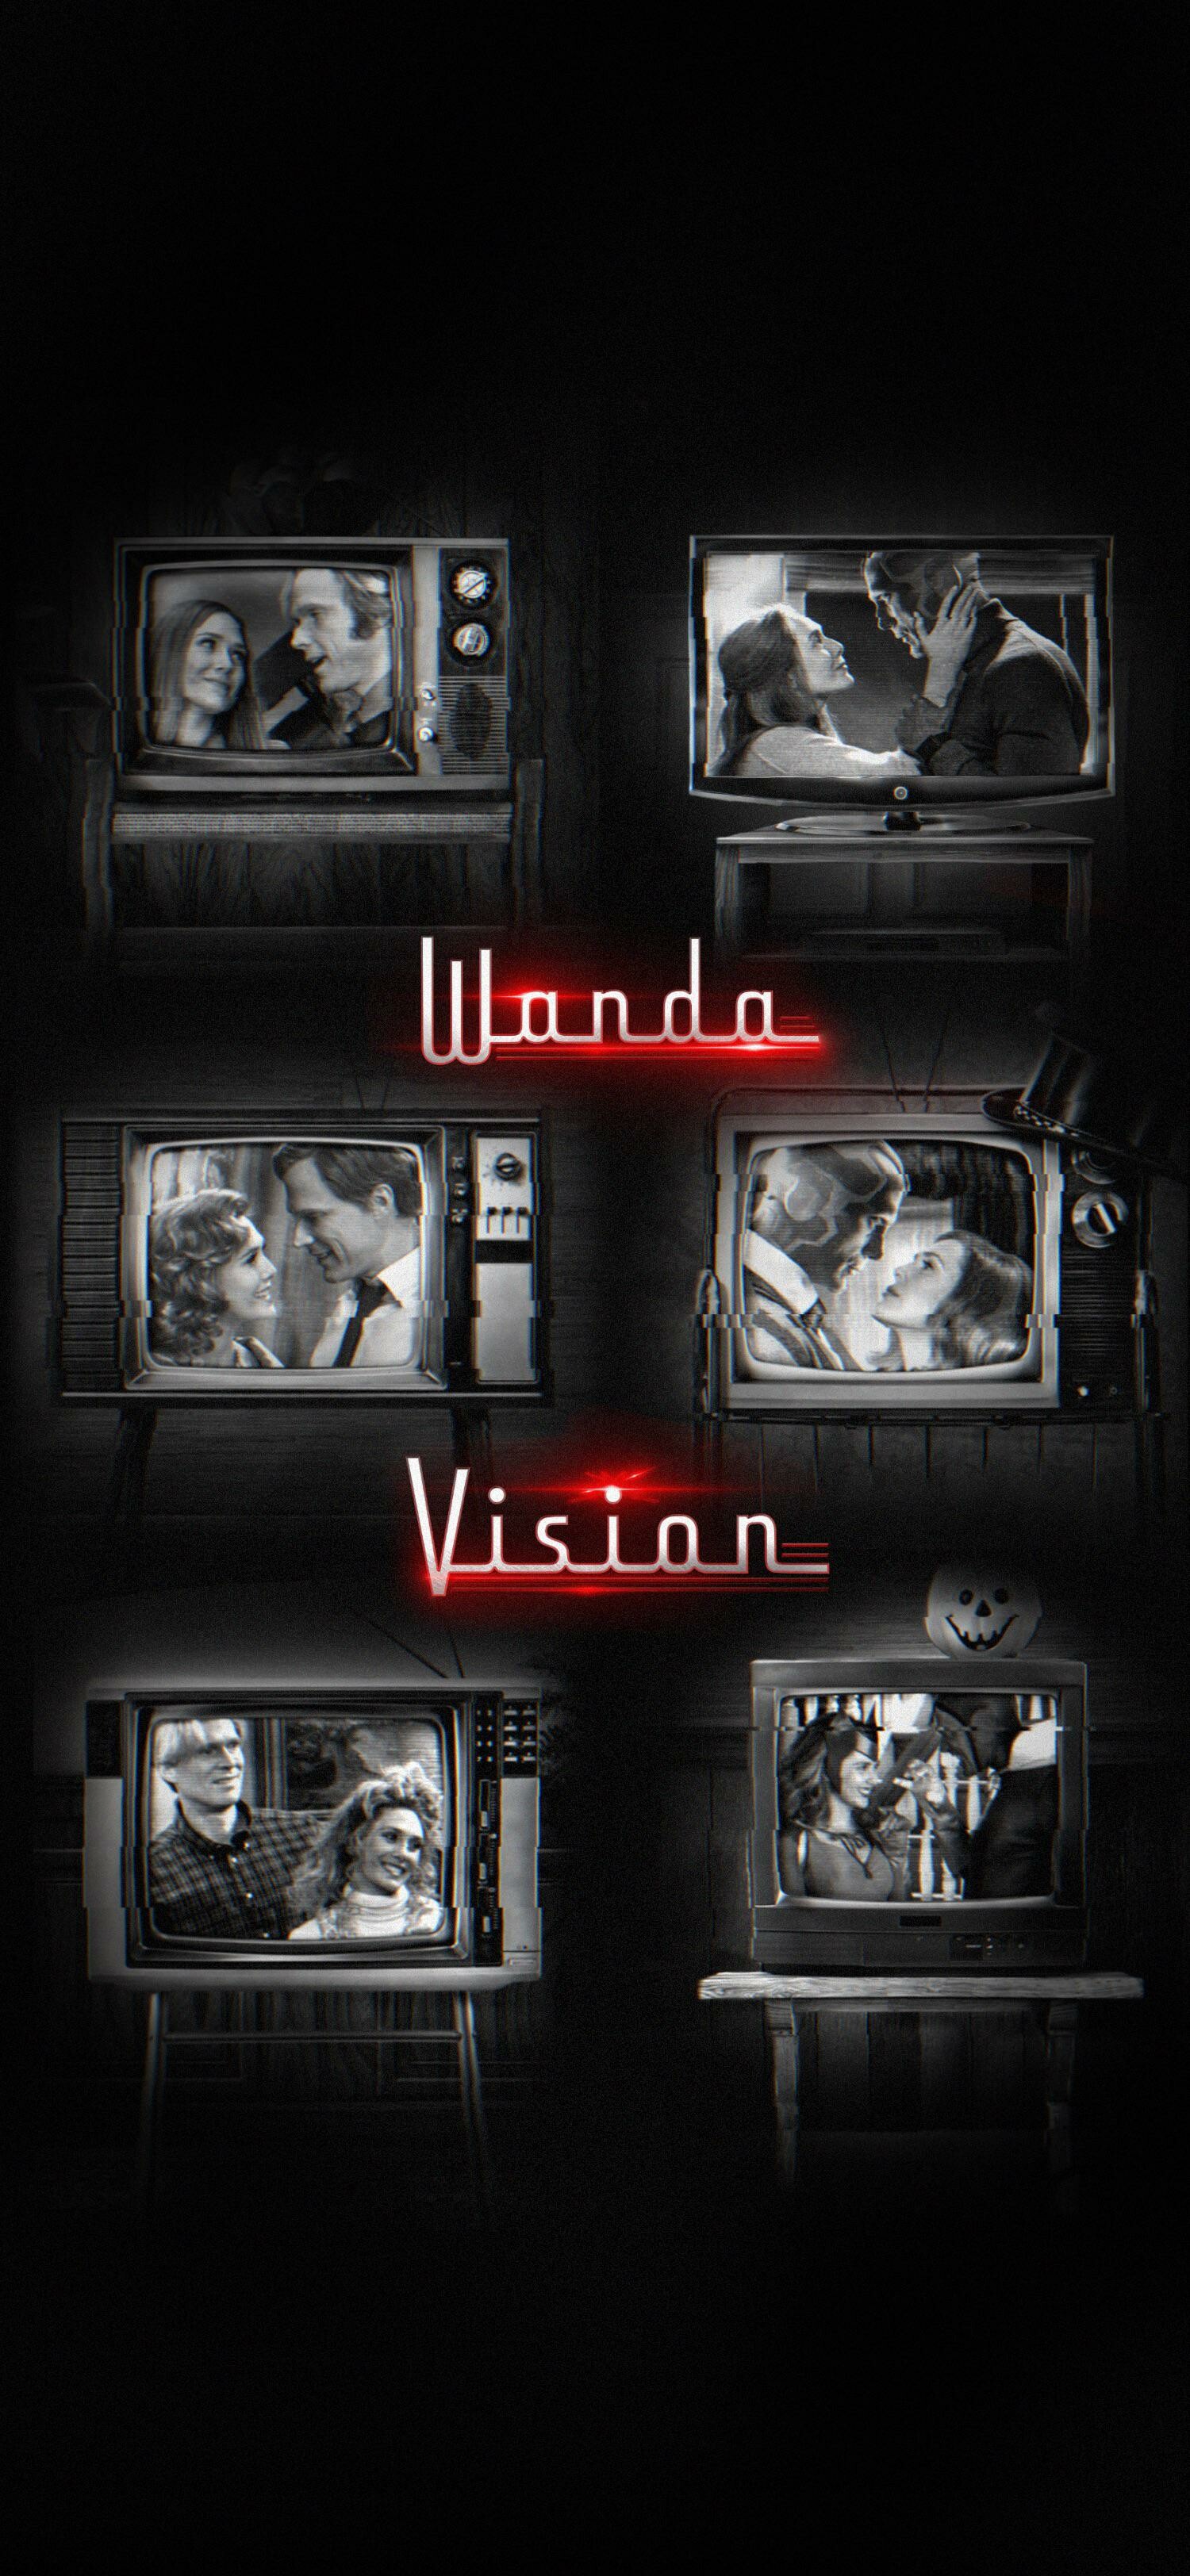 WandaVision: The series premiered with its first two episodes on January 15, 2021. 1500x3250 HD Wallpaper.